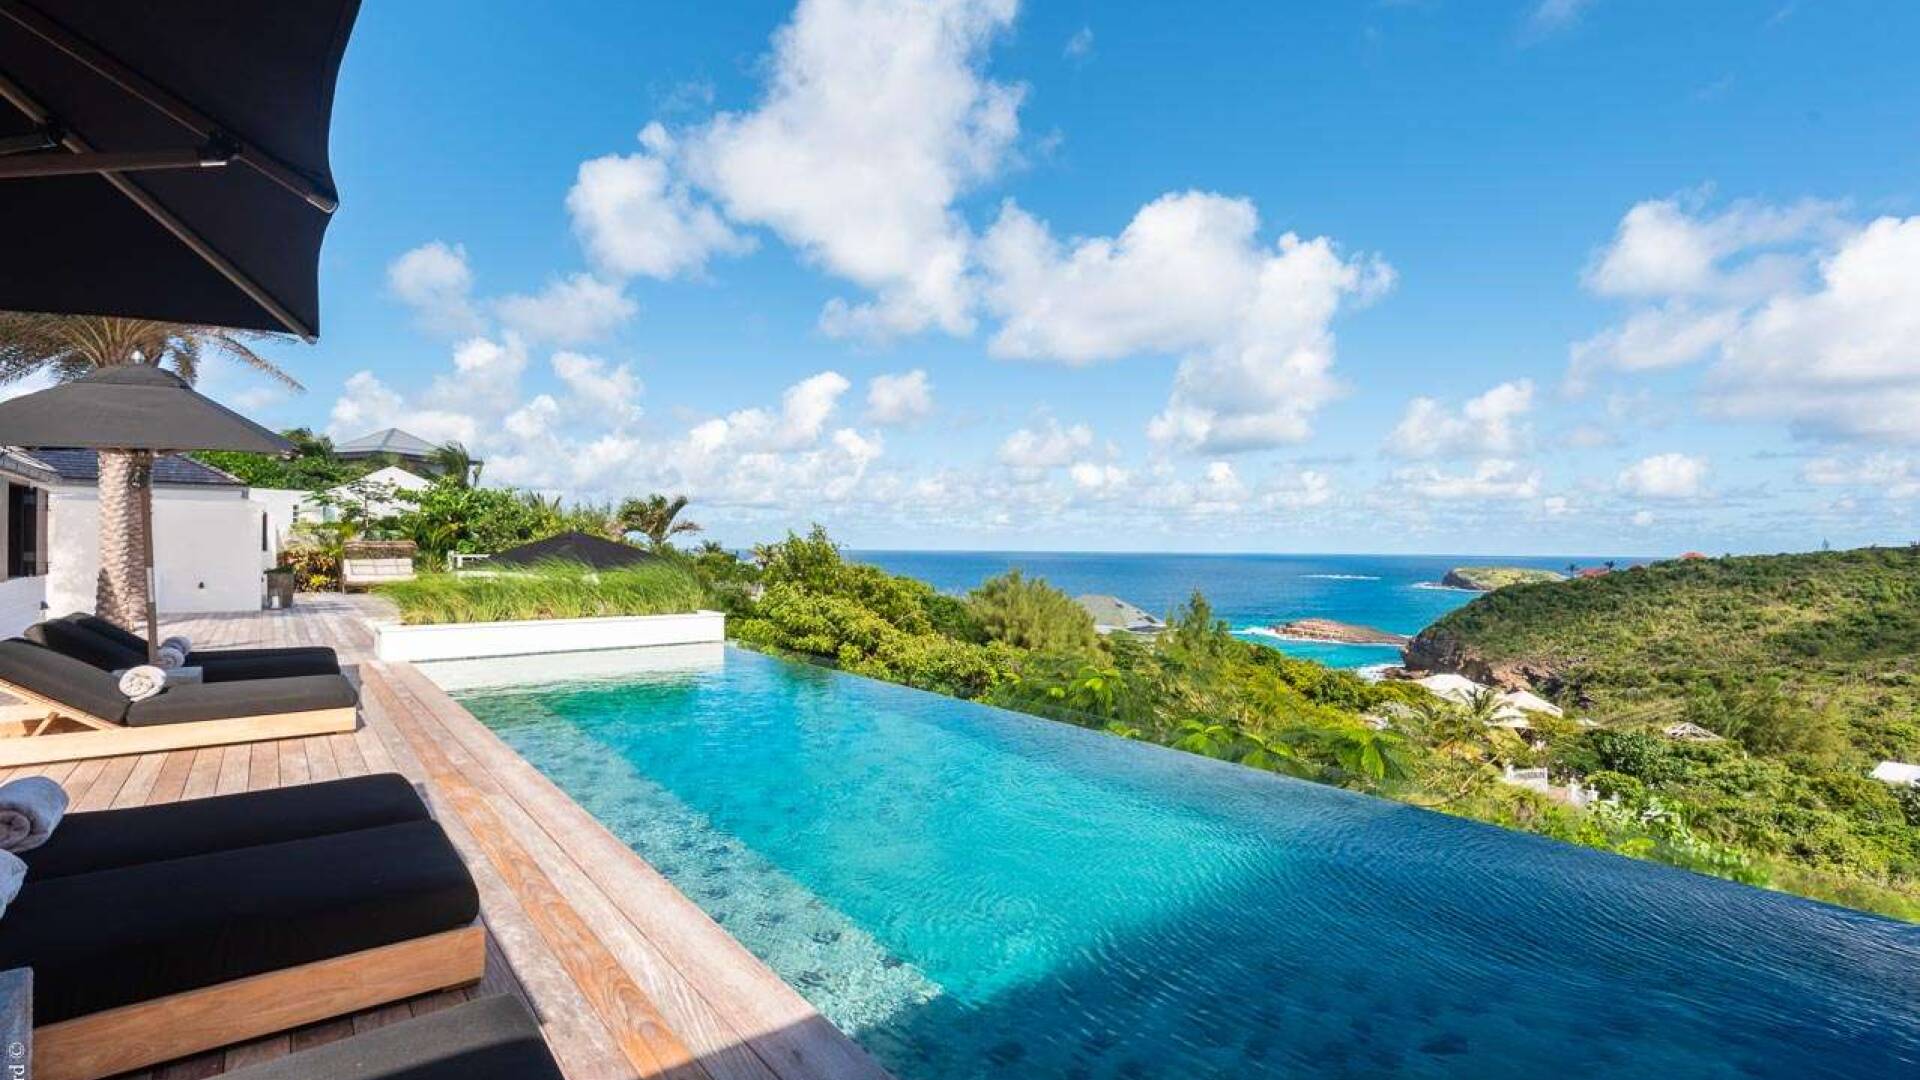 Villa Pool at WV MNT, Pointe Milou, St. Barthelemy